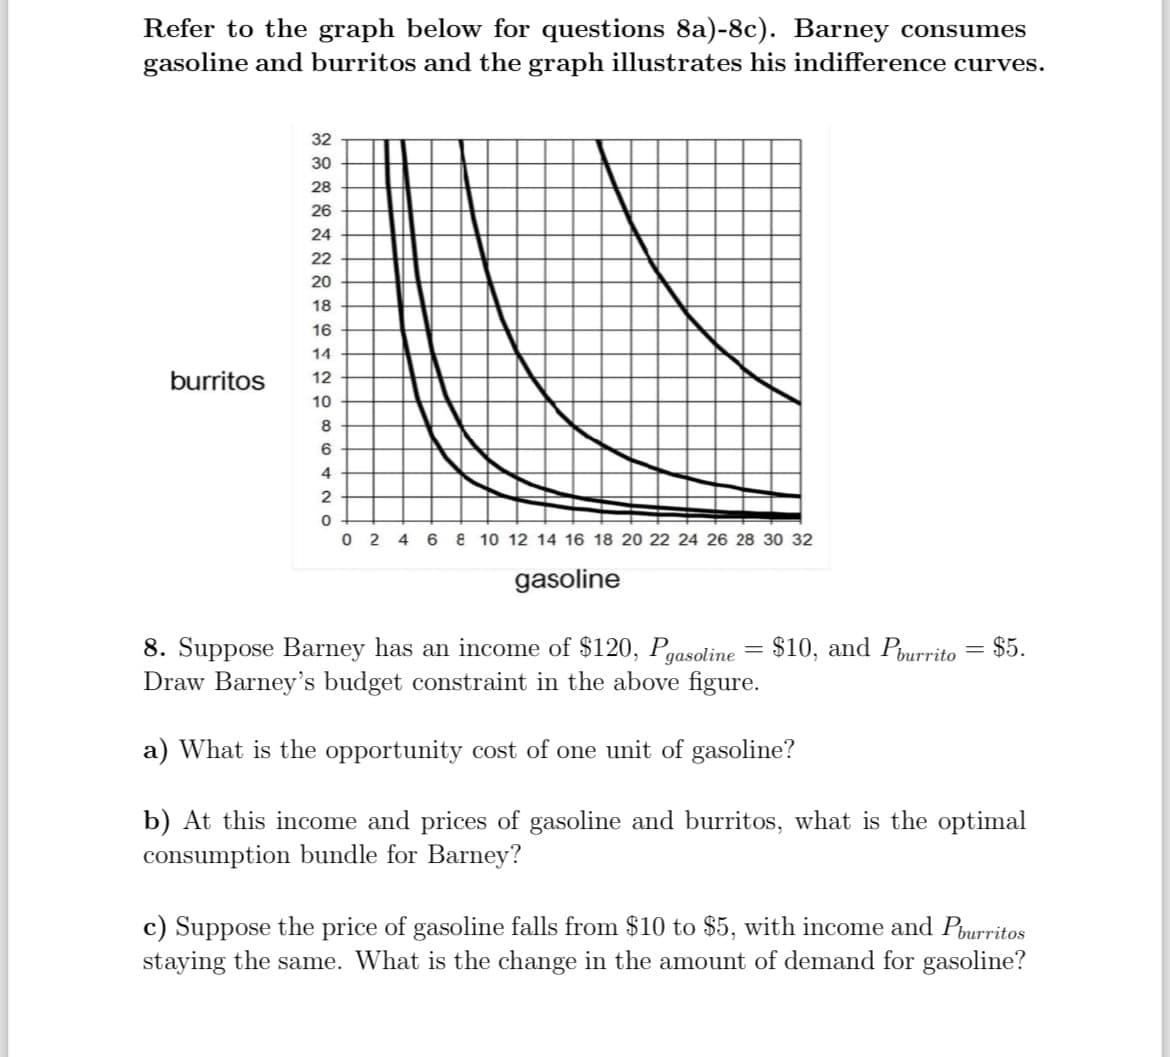 Refer to the graph below for questions 8a)-8c). Barney consumes
gasoline and burritos and the graph illustrates his indifference curves.
32
30
28
26
24
22
20
18
16
14
burritos
12
10
8
6
4
2
0
02
4 6 8 10 12 14 16 18 20 22 24 26 28 30 32
gasoline
8. Suppose Barney has an income of $120, Pgasoline = $10, and Pburrito = $5.
Draw Barney's budget constraint in the above figure.
a) What is the opportunity cost of one unit of gasoline?
b) At this income and prices of gasoline and burritos, what is the optimal
consumption bundle for Barney?
c) Suppose the price of gasoline falls from $10 to $5, with income and Pburritos
staying the same. What is the change in the amount of demand for gasoline?